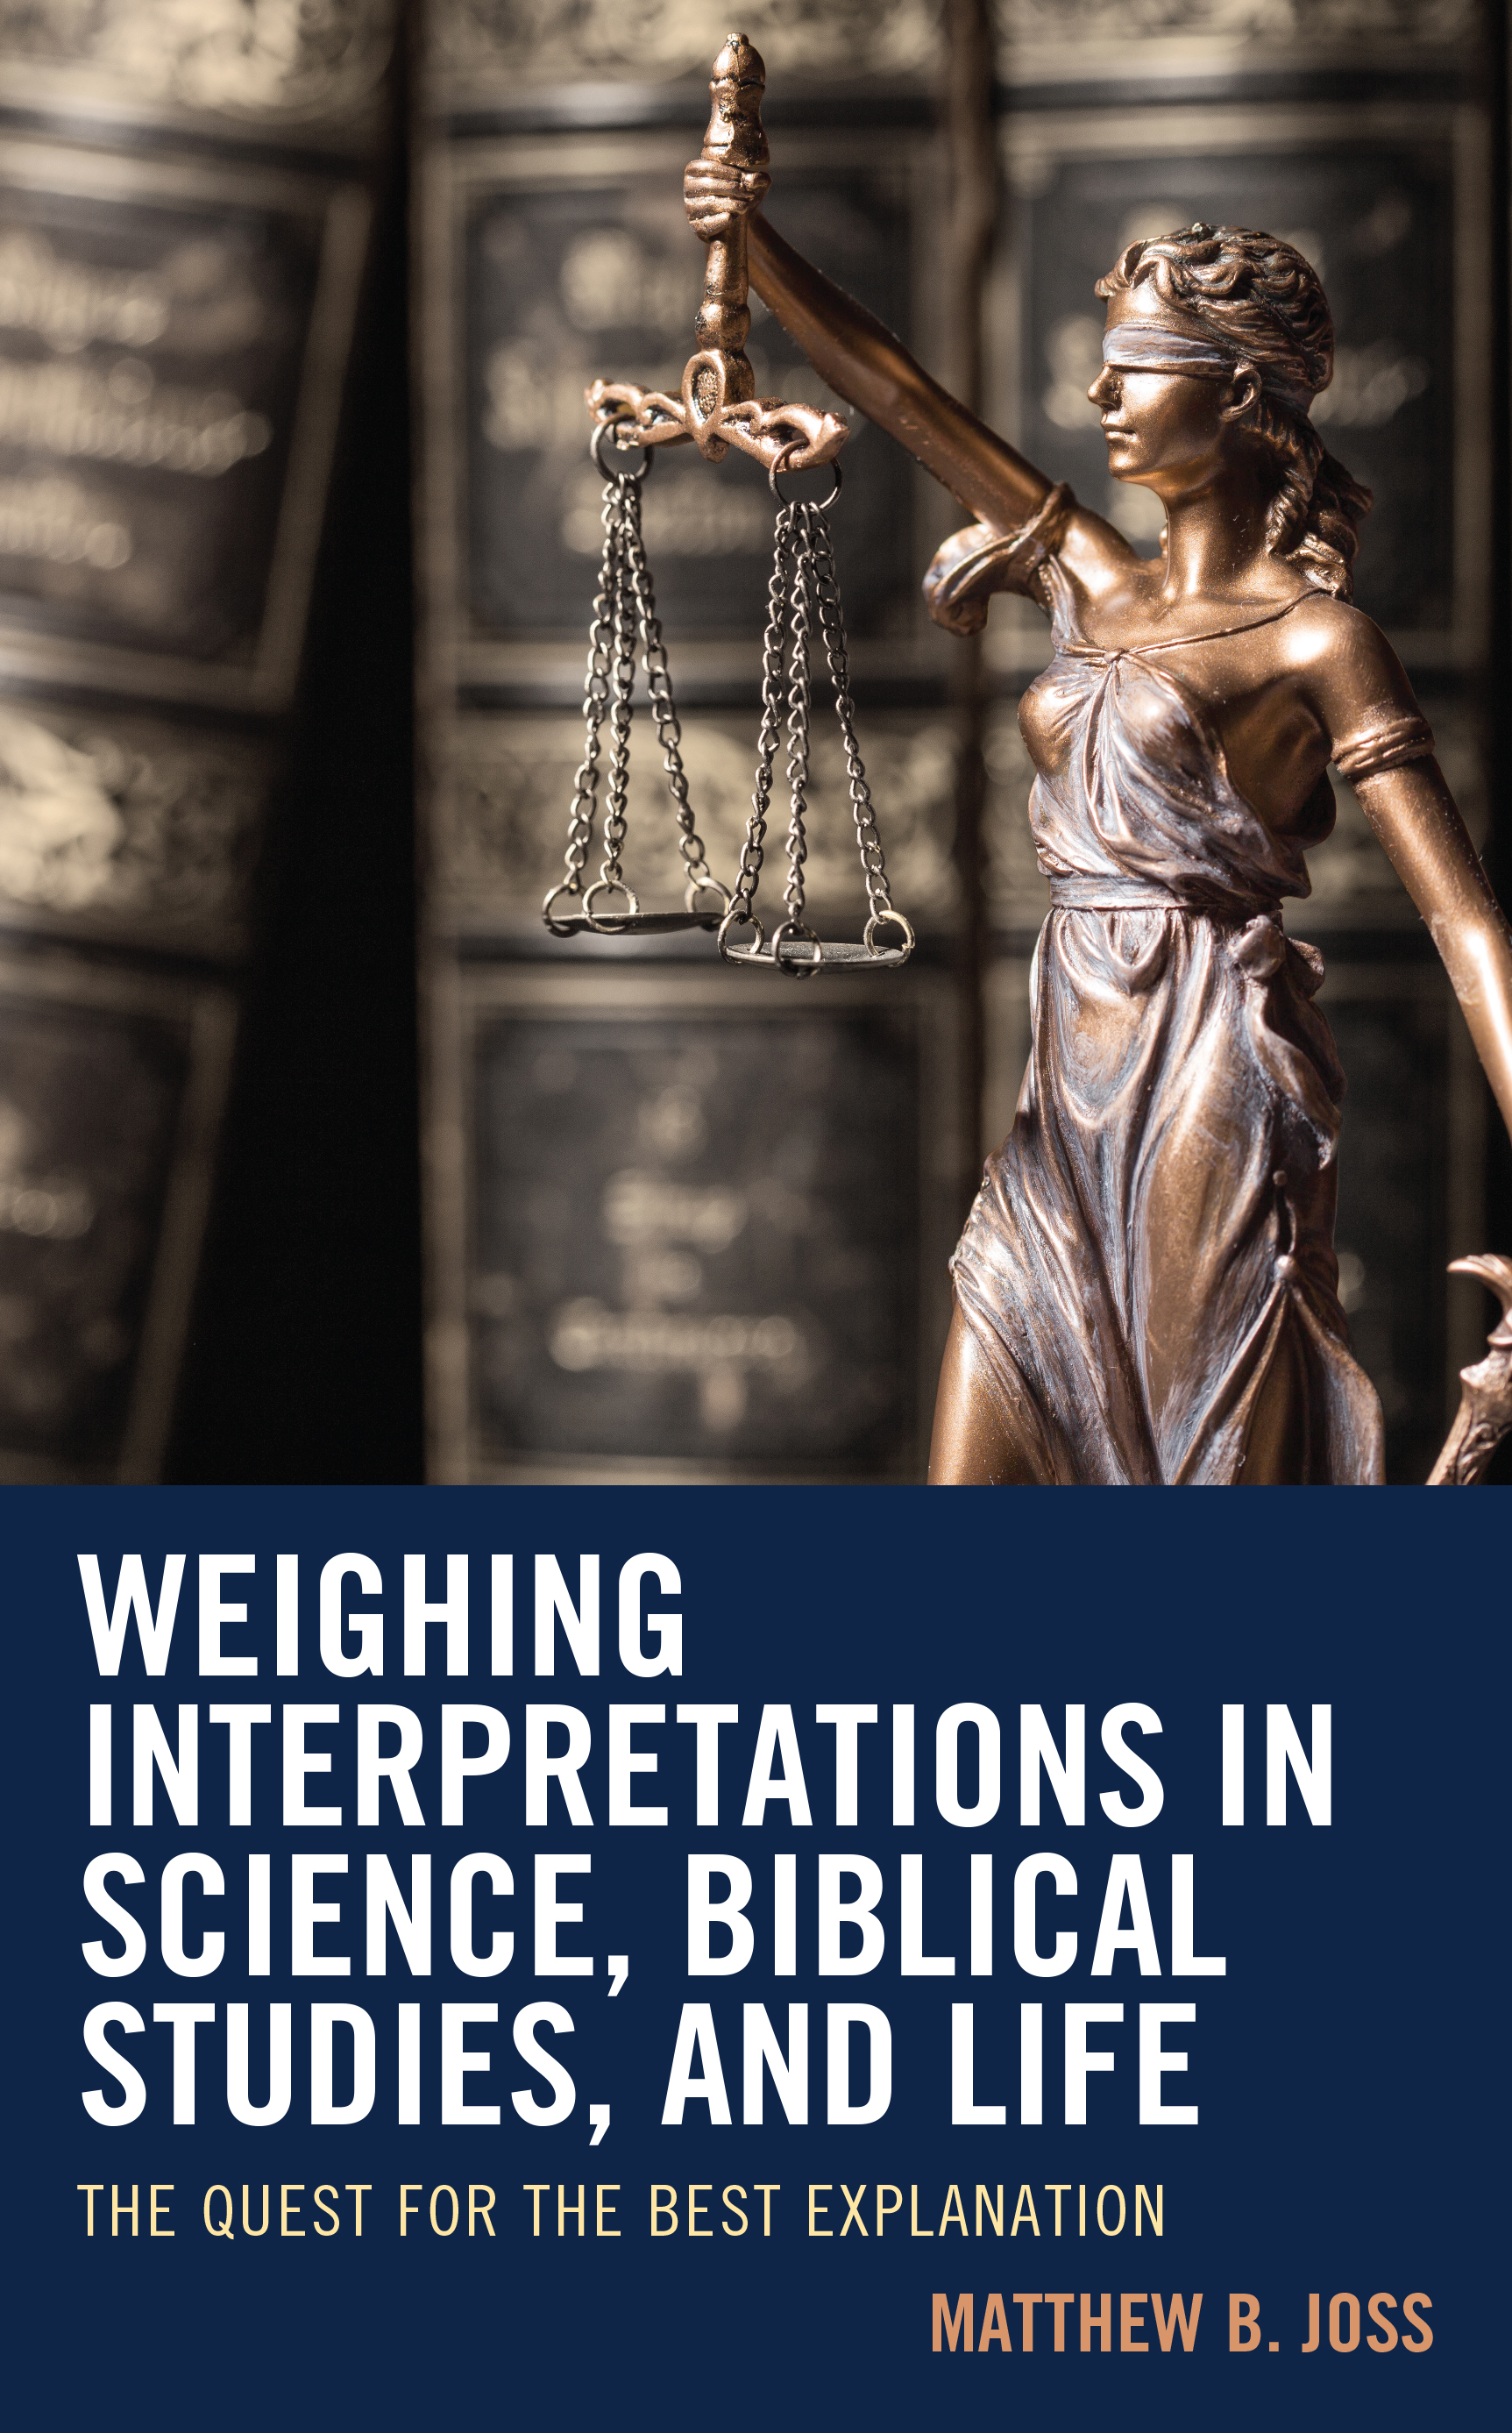 Weighing Interpretations in Science, Biblical Studies, and Life: The Quest for the Best Explanation